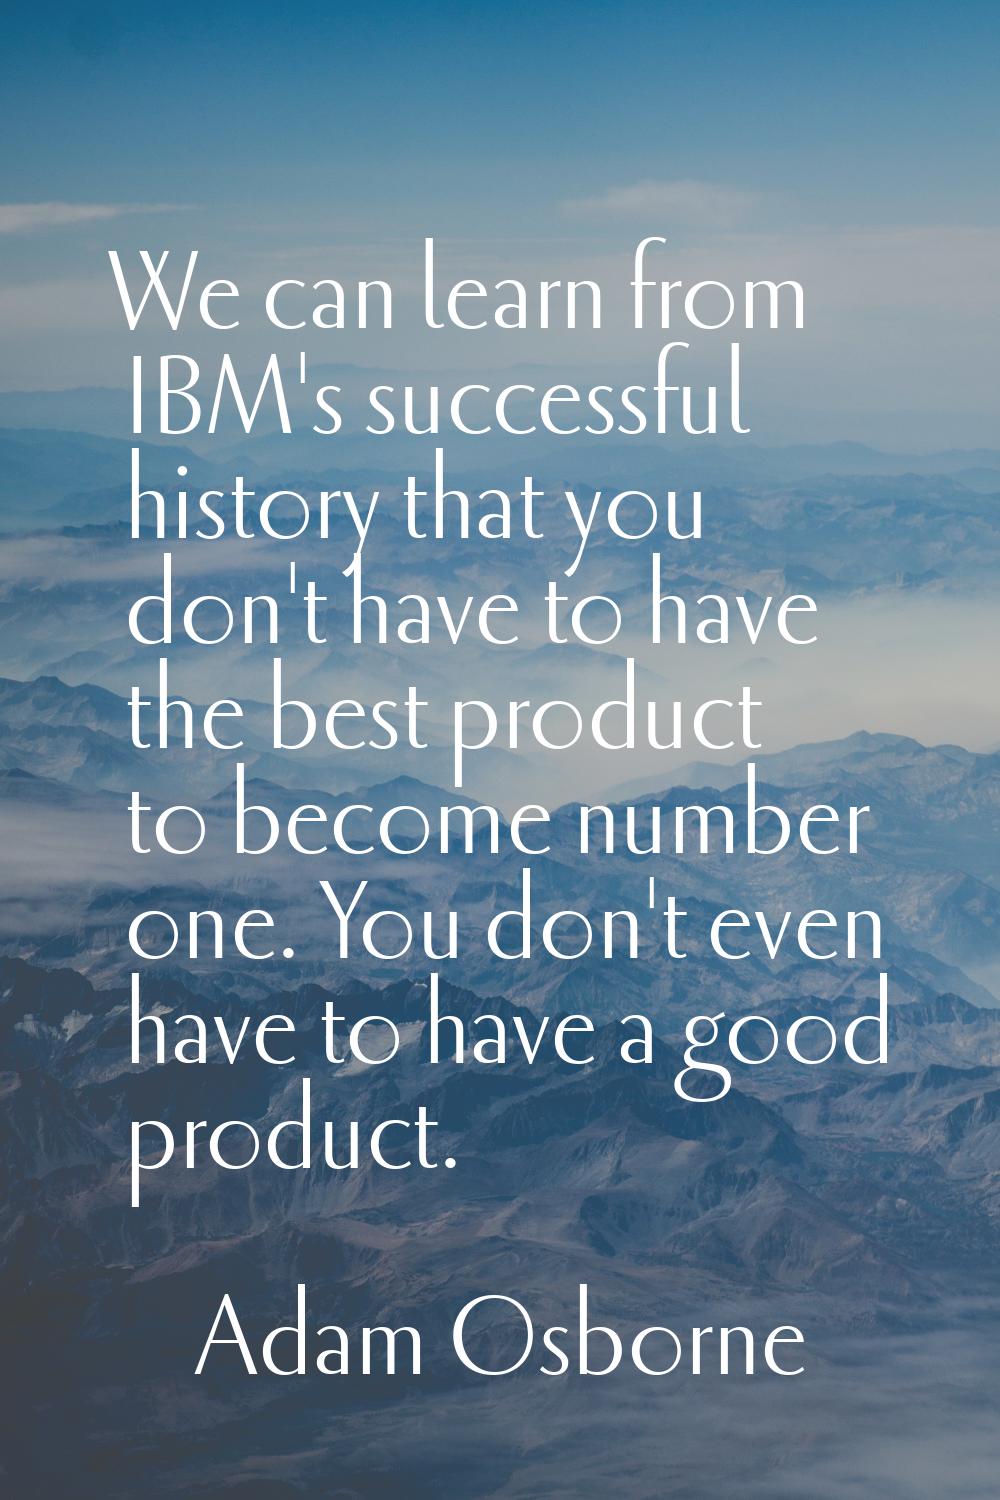 We can learn from IBM's successful history that you don't have to have the best product to become n